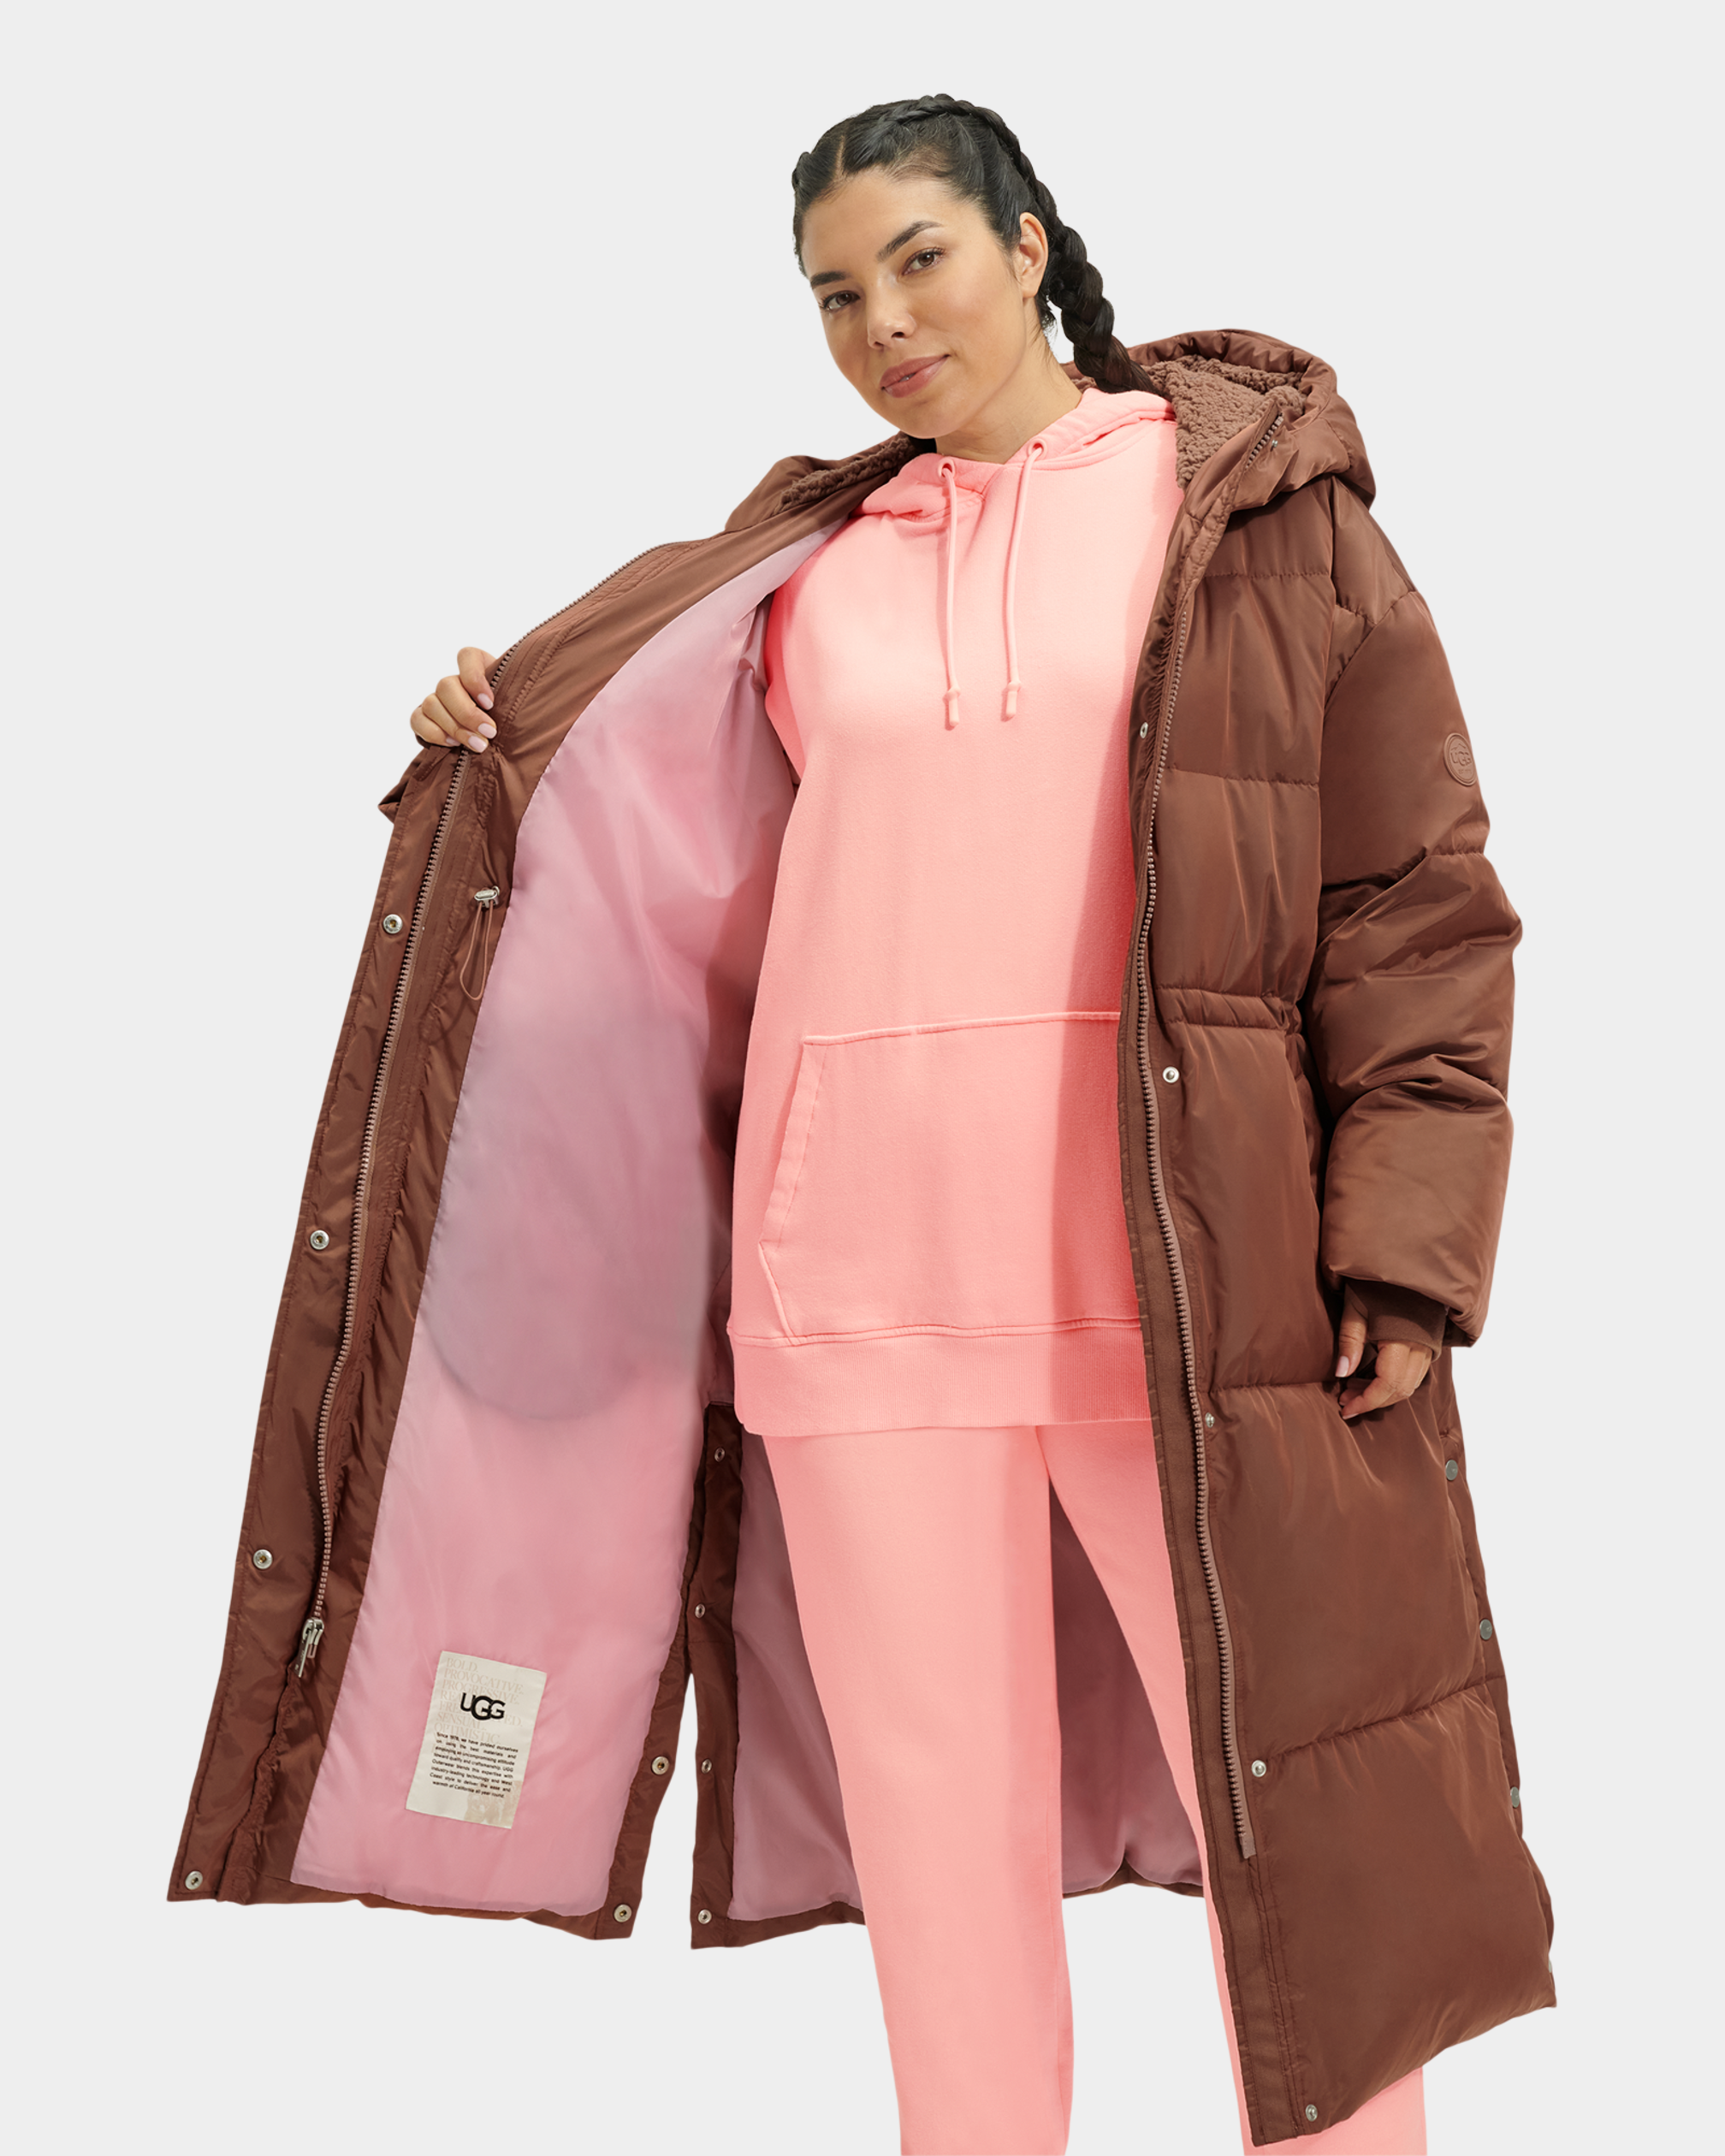 11 best women's puffer jackets for those colder days | HELLO!